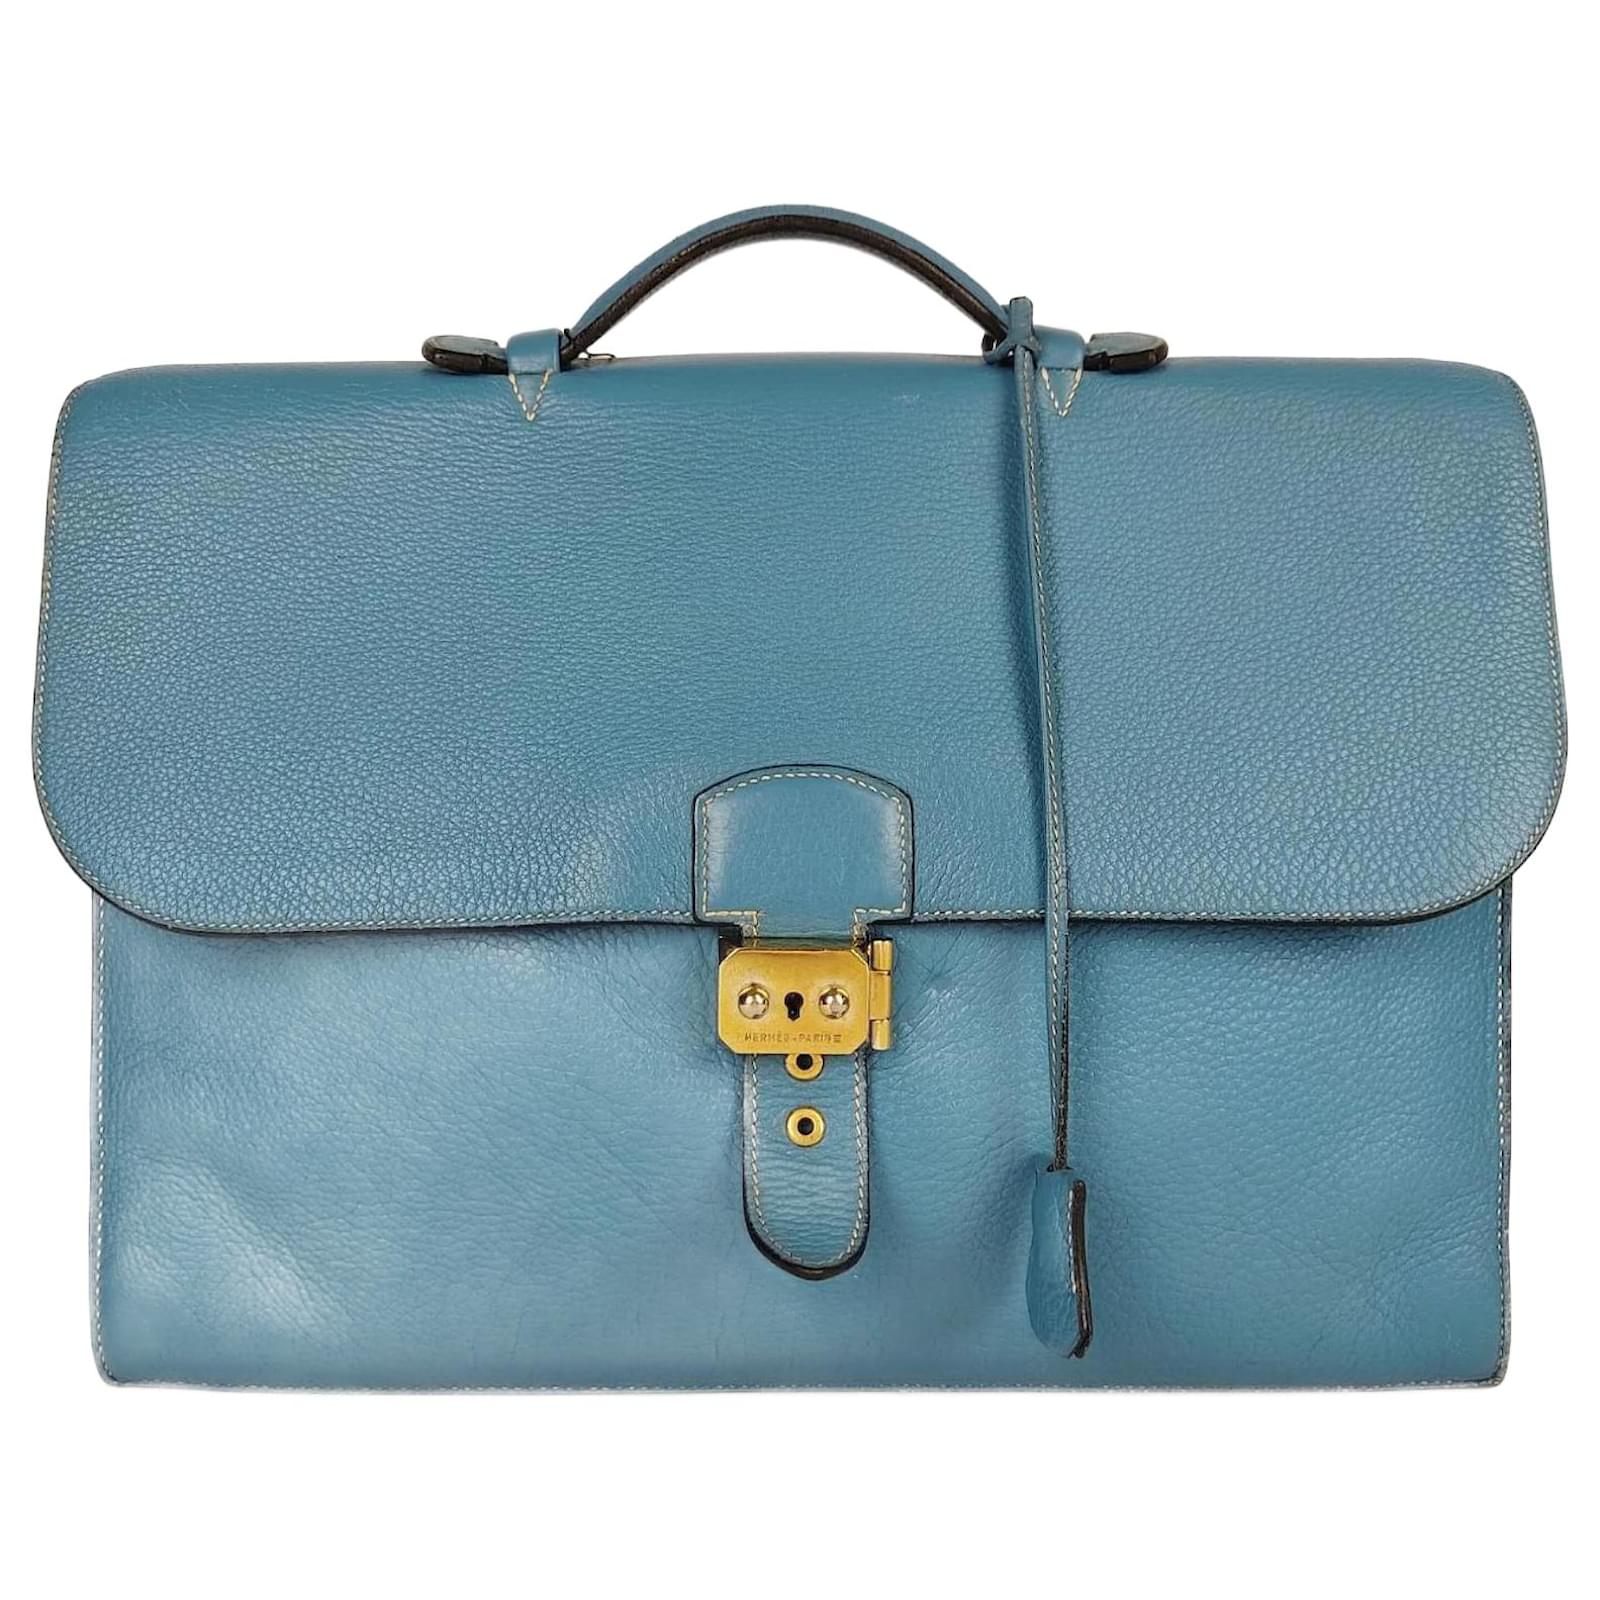 Hermès dépeches work bag in turquoise leather Light blue ref